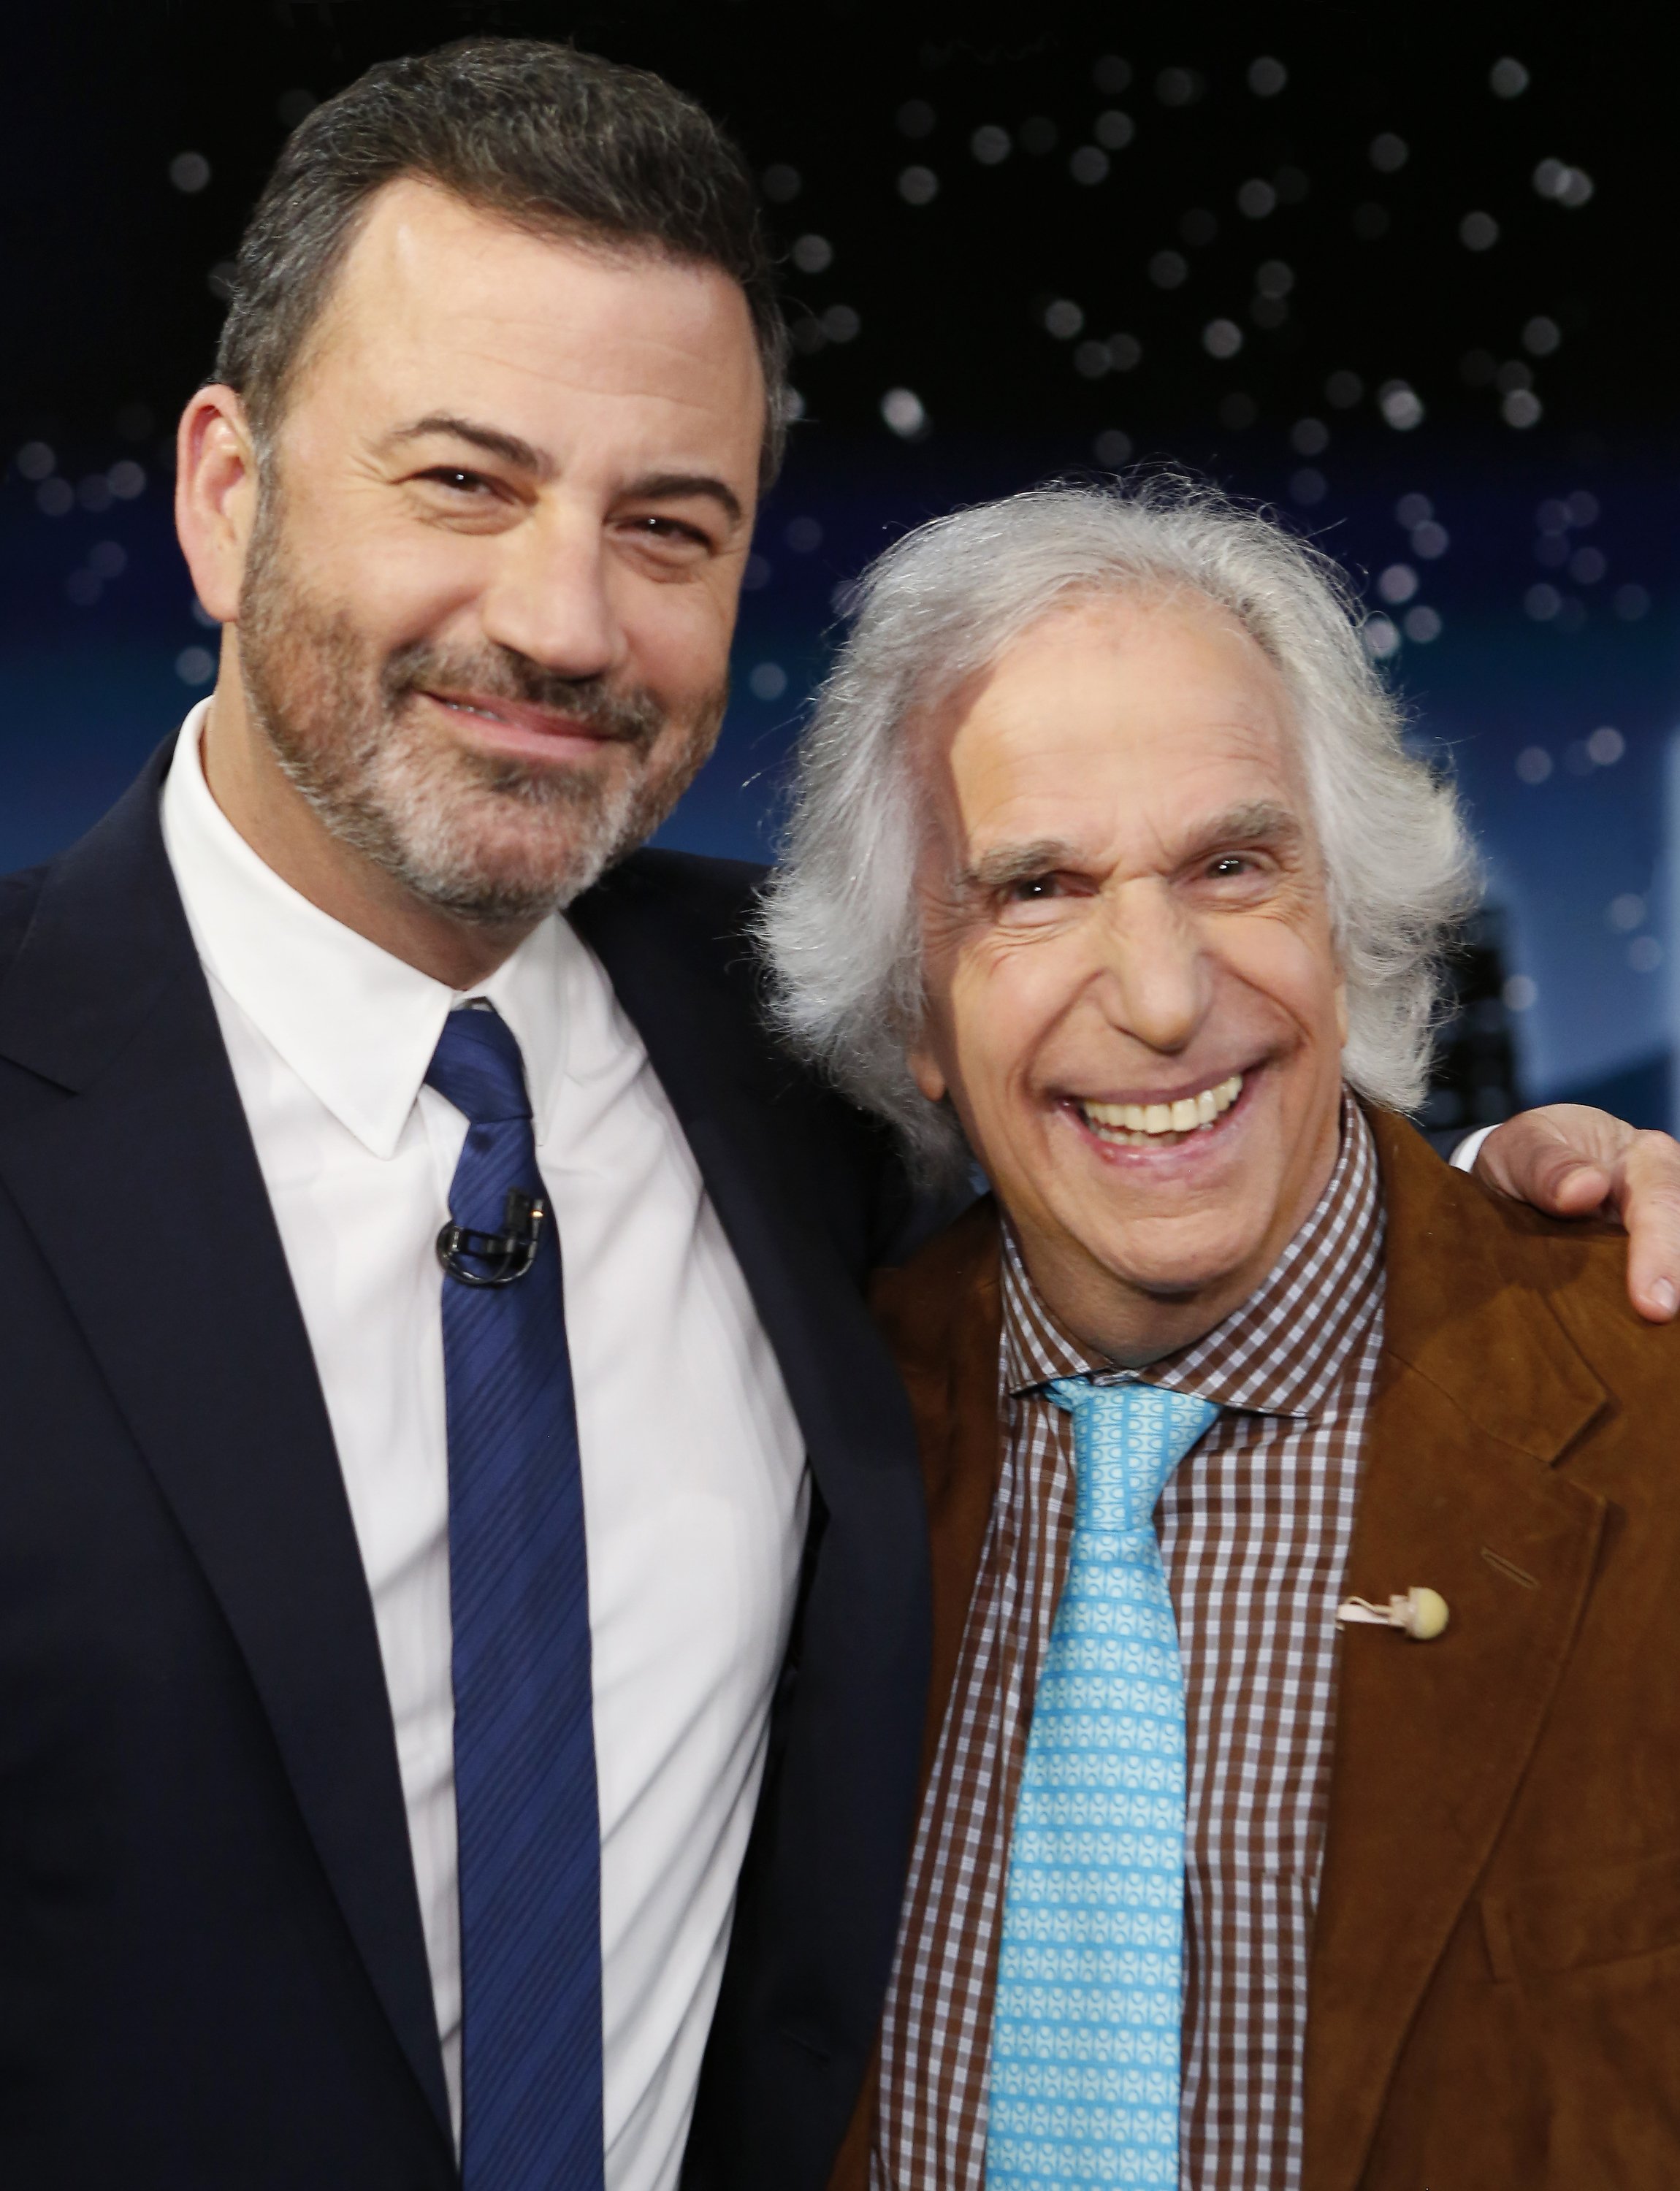 Jimmy Kimmel and Henry Winkler  photographed on the set of "Jimmy Kimmel Live!" | Source: Getty Images